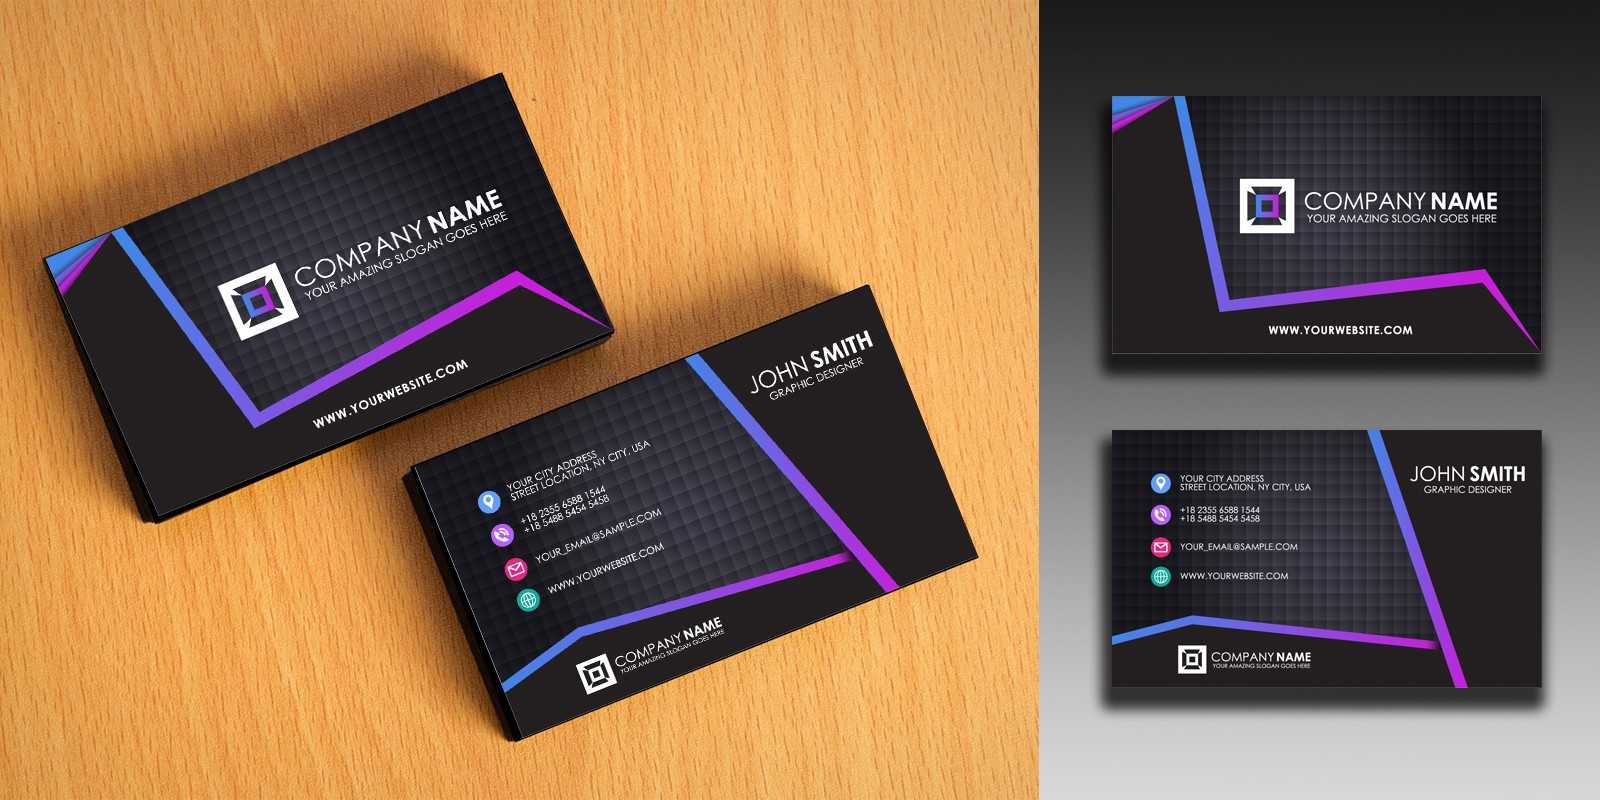 Clean And Simple Business Card Template Intended For Buisness Card Templates